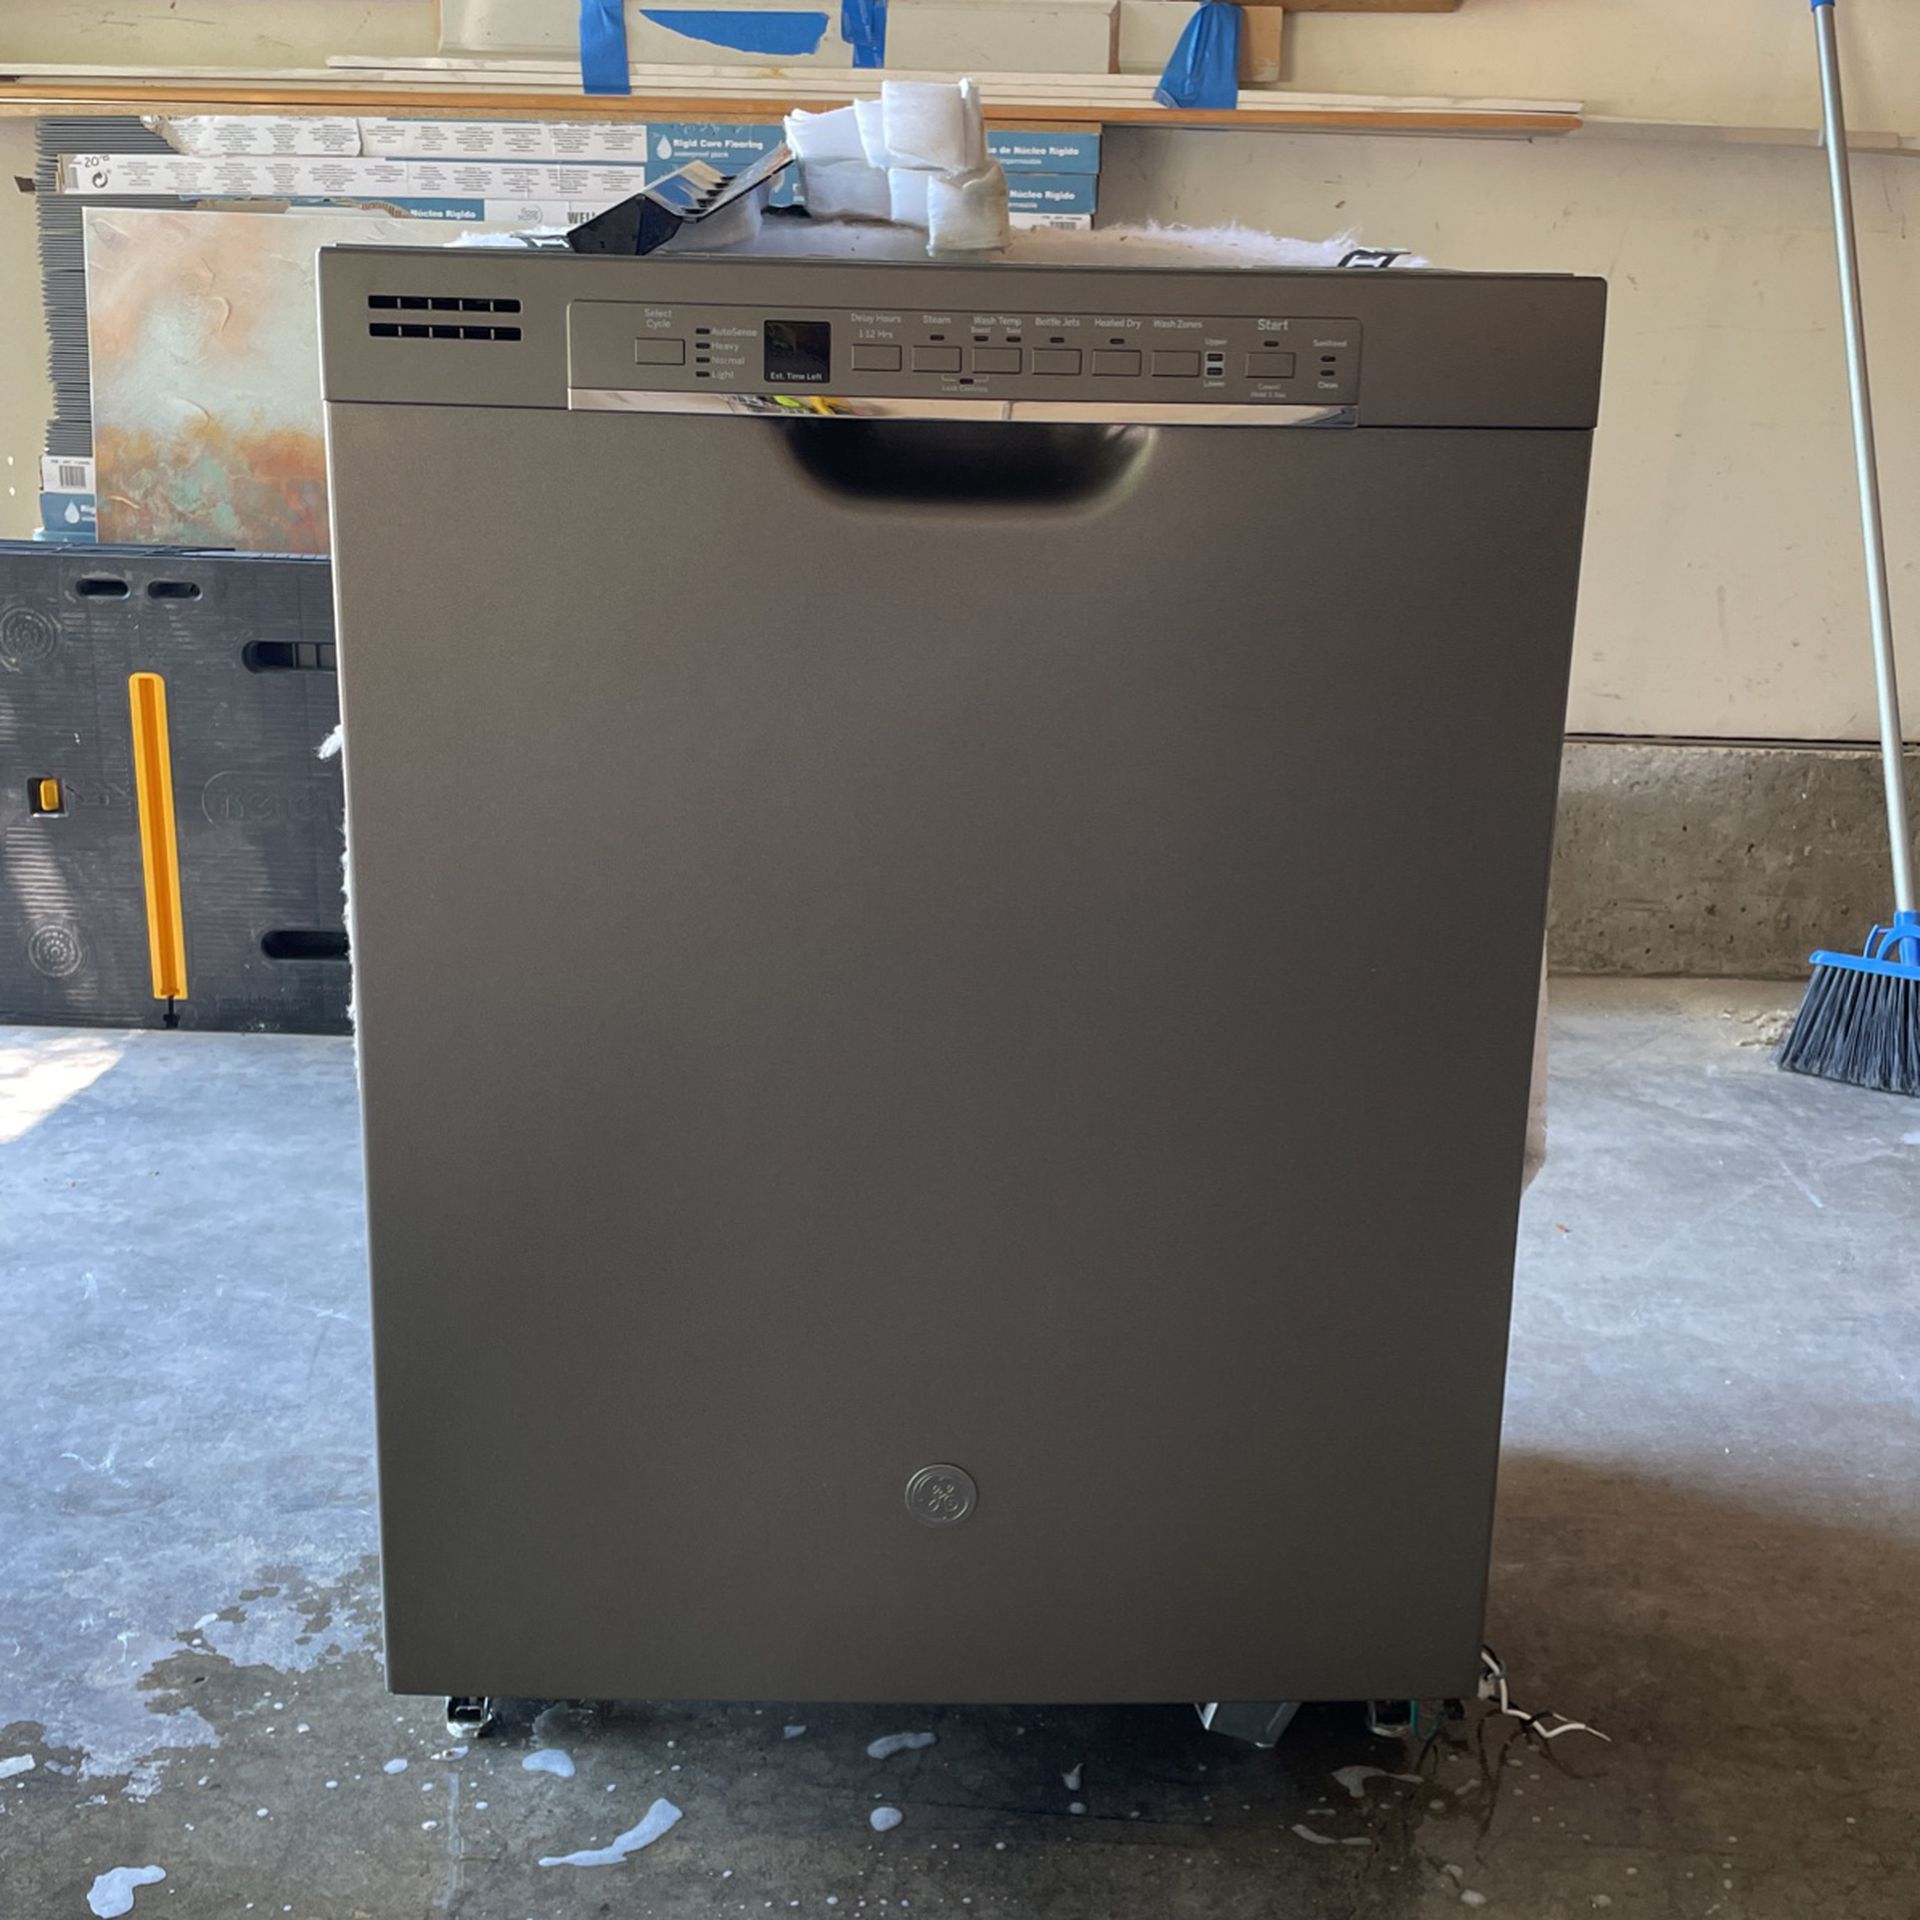 GE Dishwasher Two Years Old